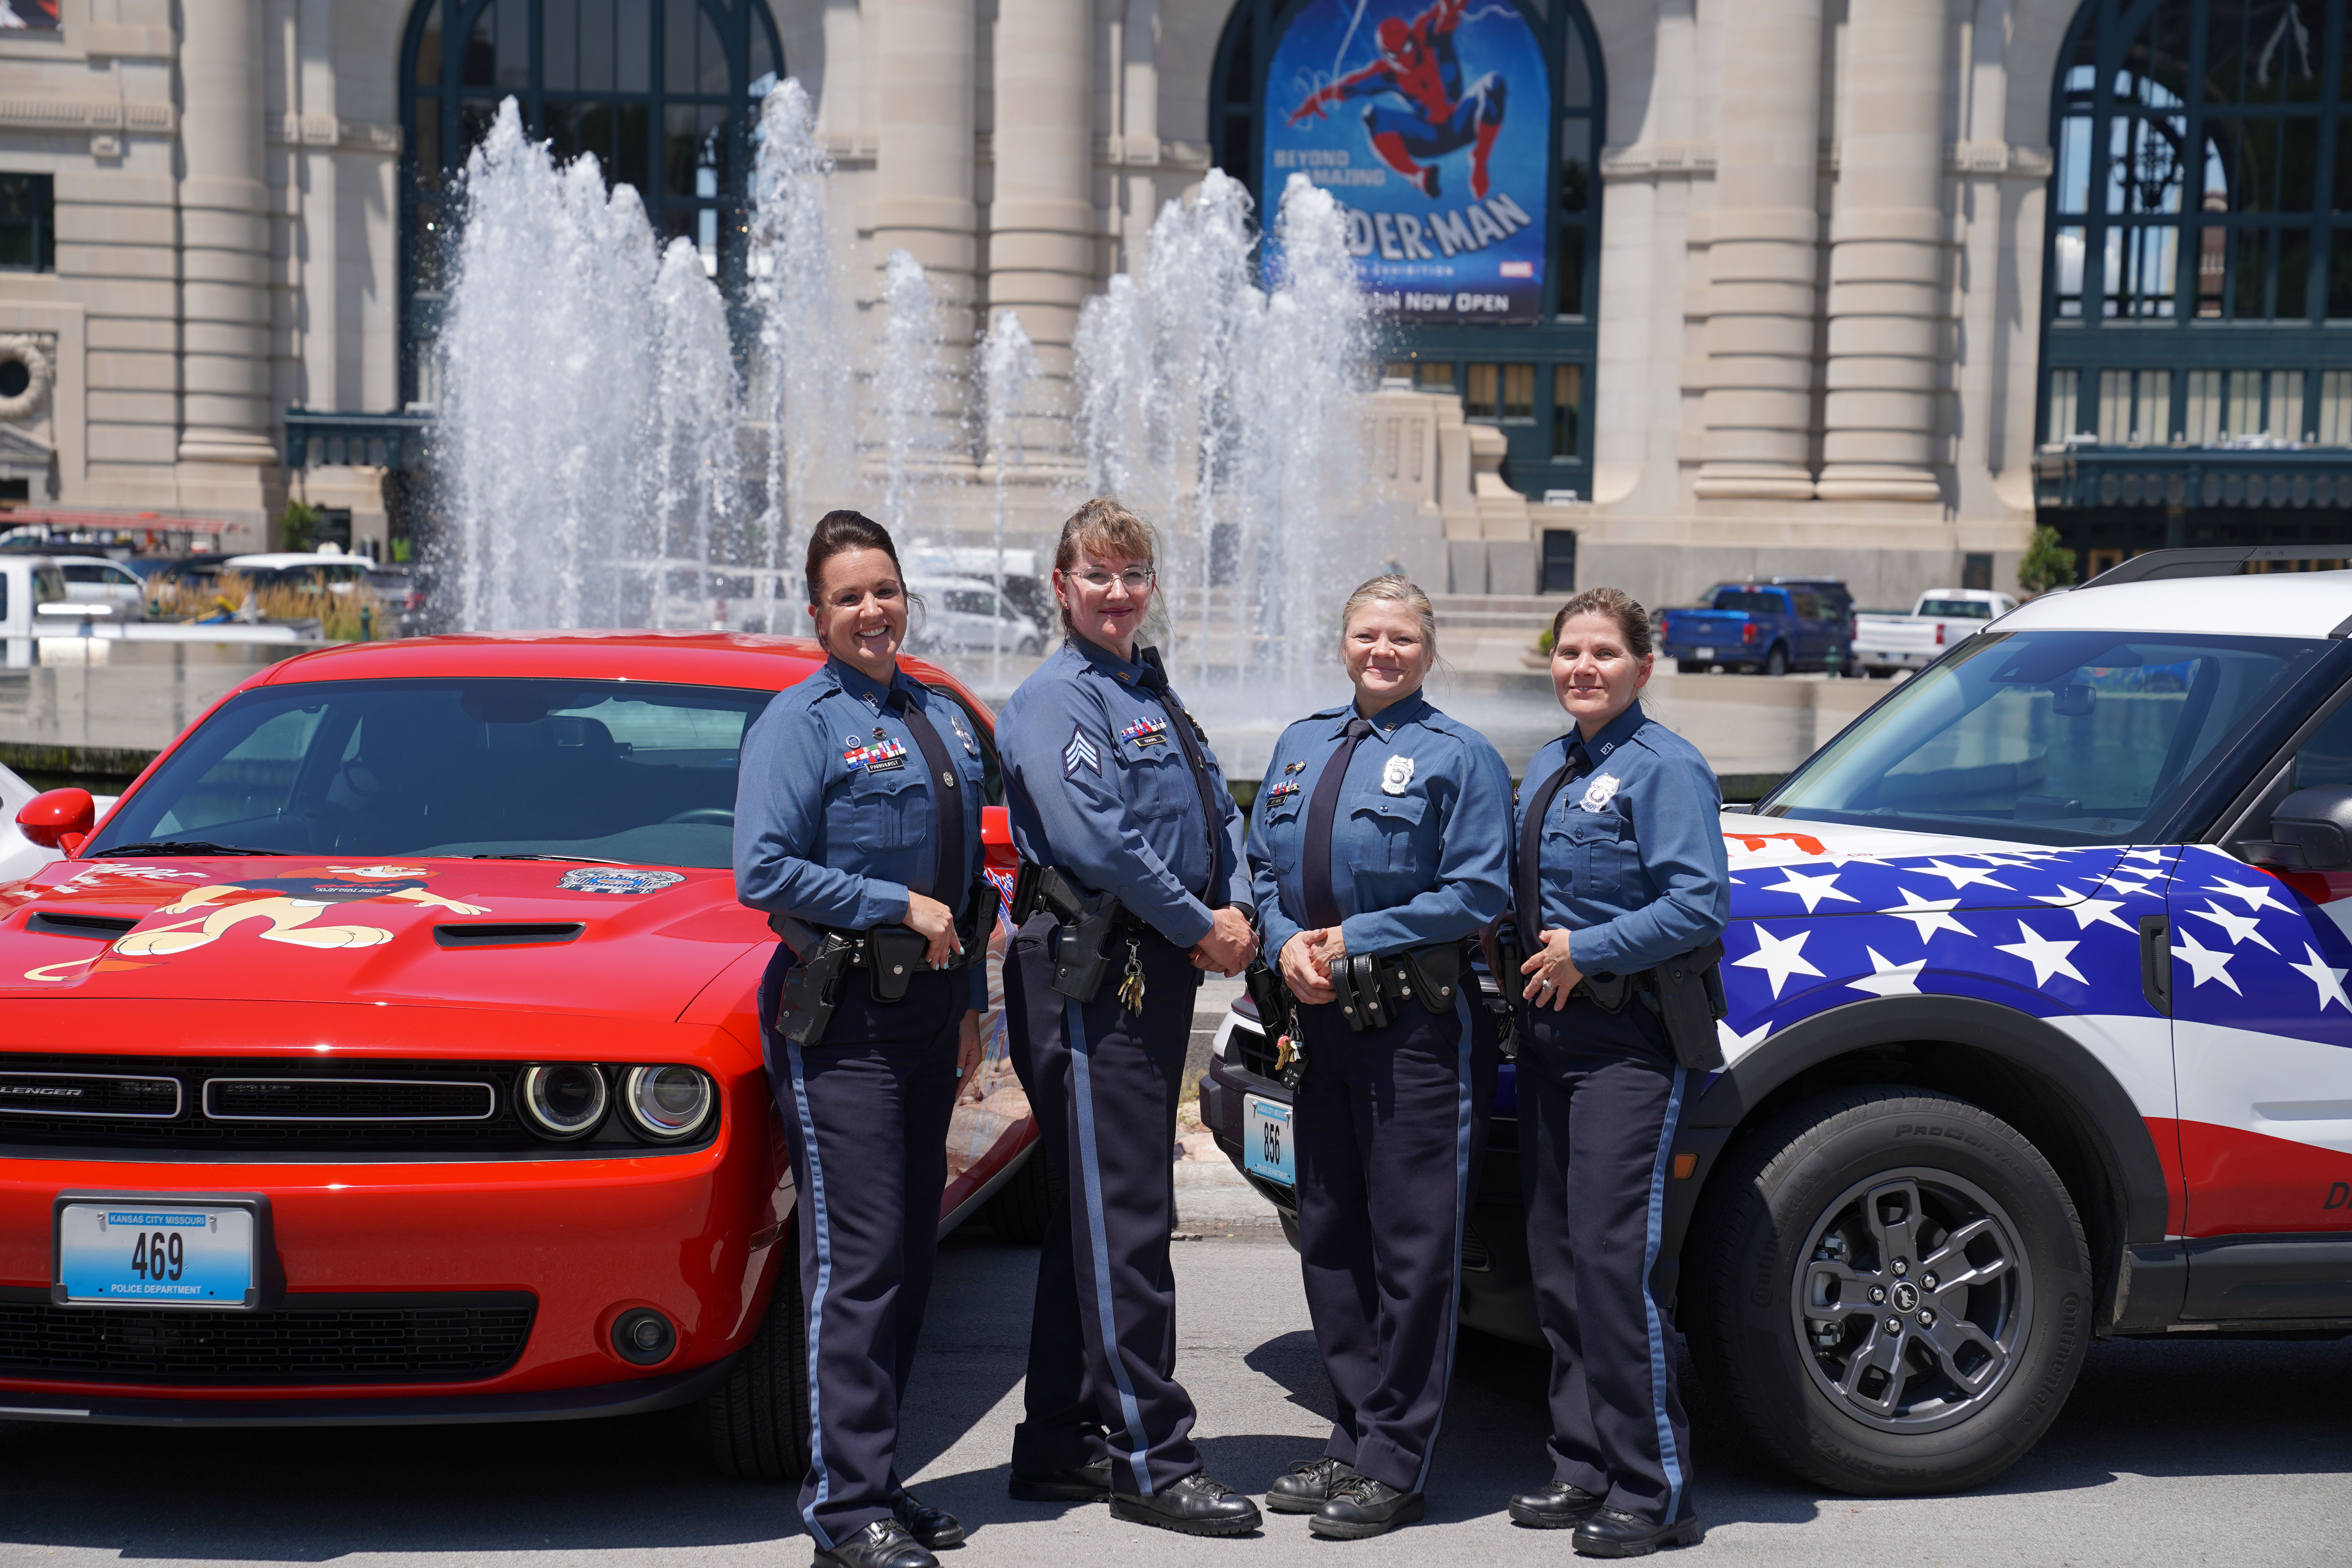 Four DARE and GREAT Officers in uniform, posing with their vehicles in front of Union Station.